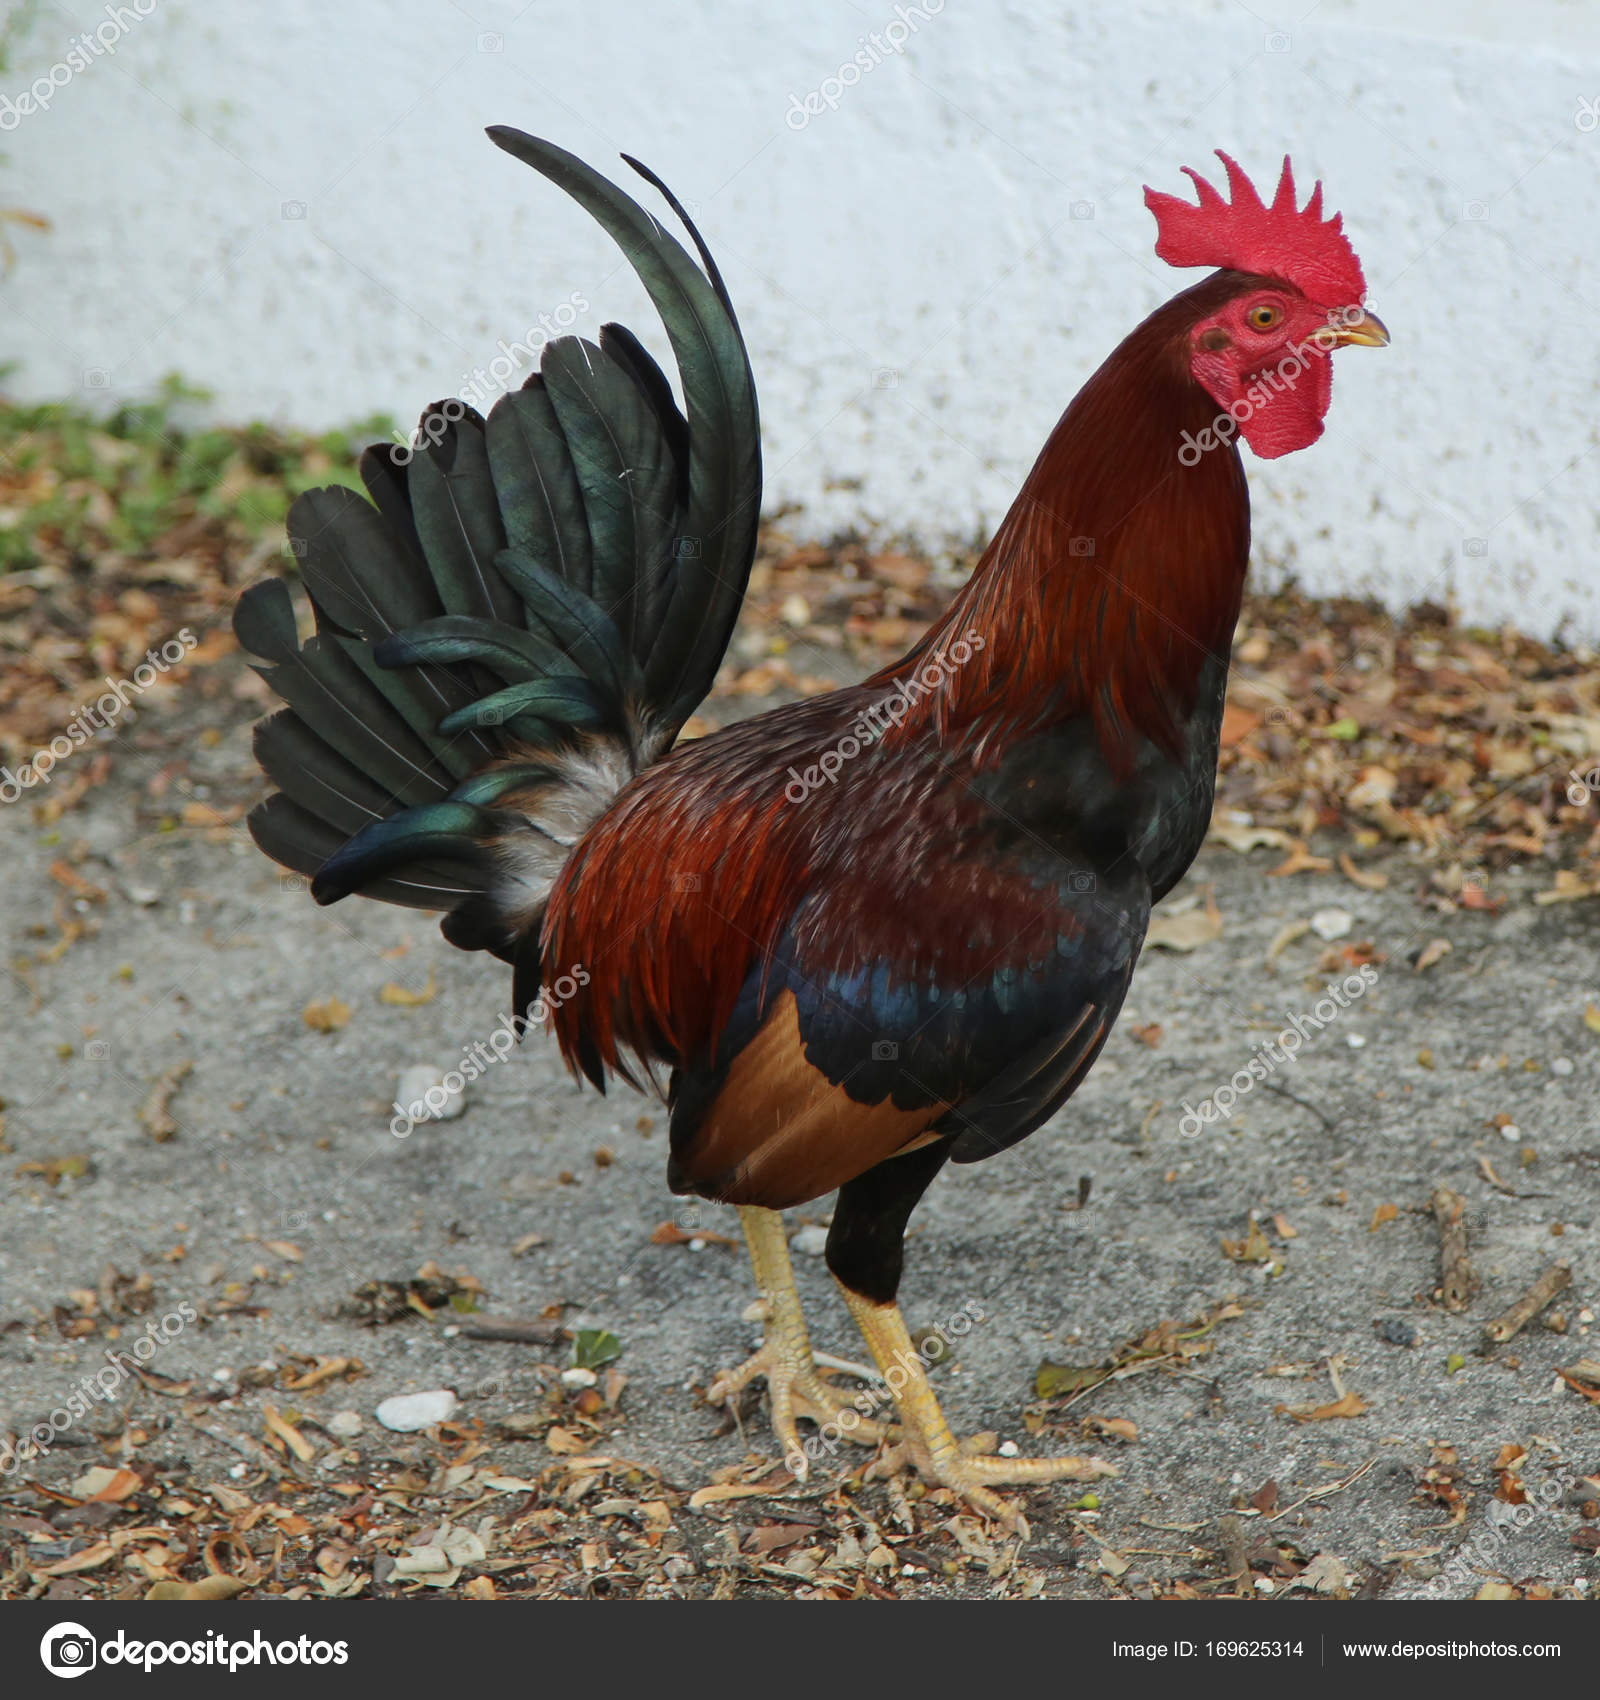 Wild rooster in Key West, Florida — Stock Photo © zhukovsky #169625314